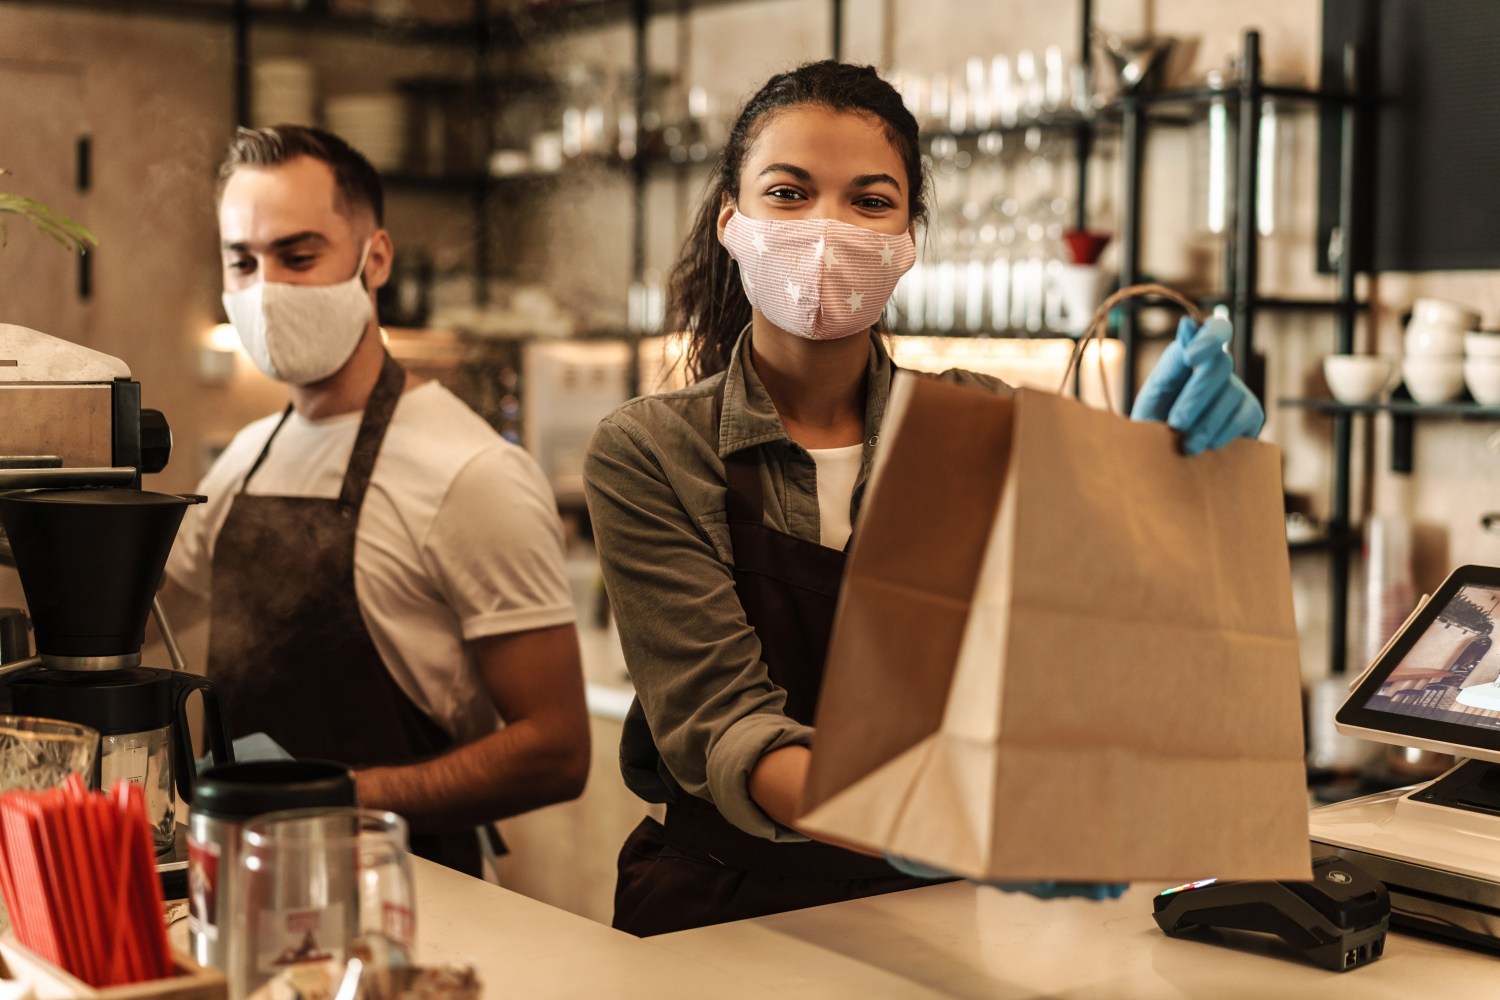 Young people working in coffee shop with surgical masks on.